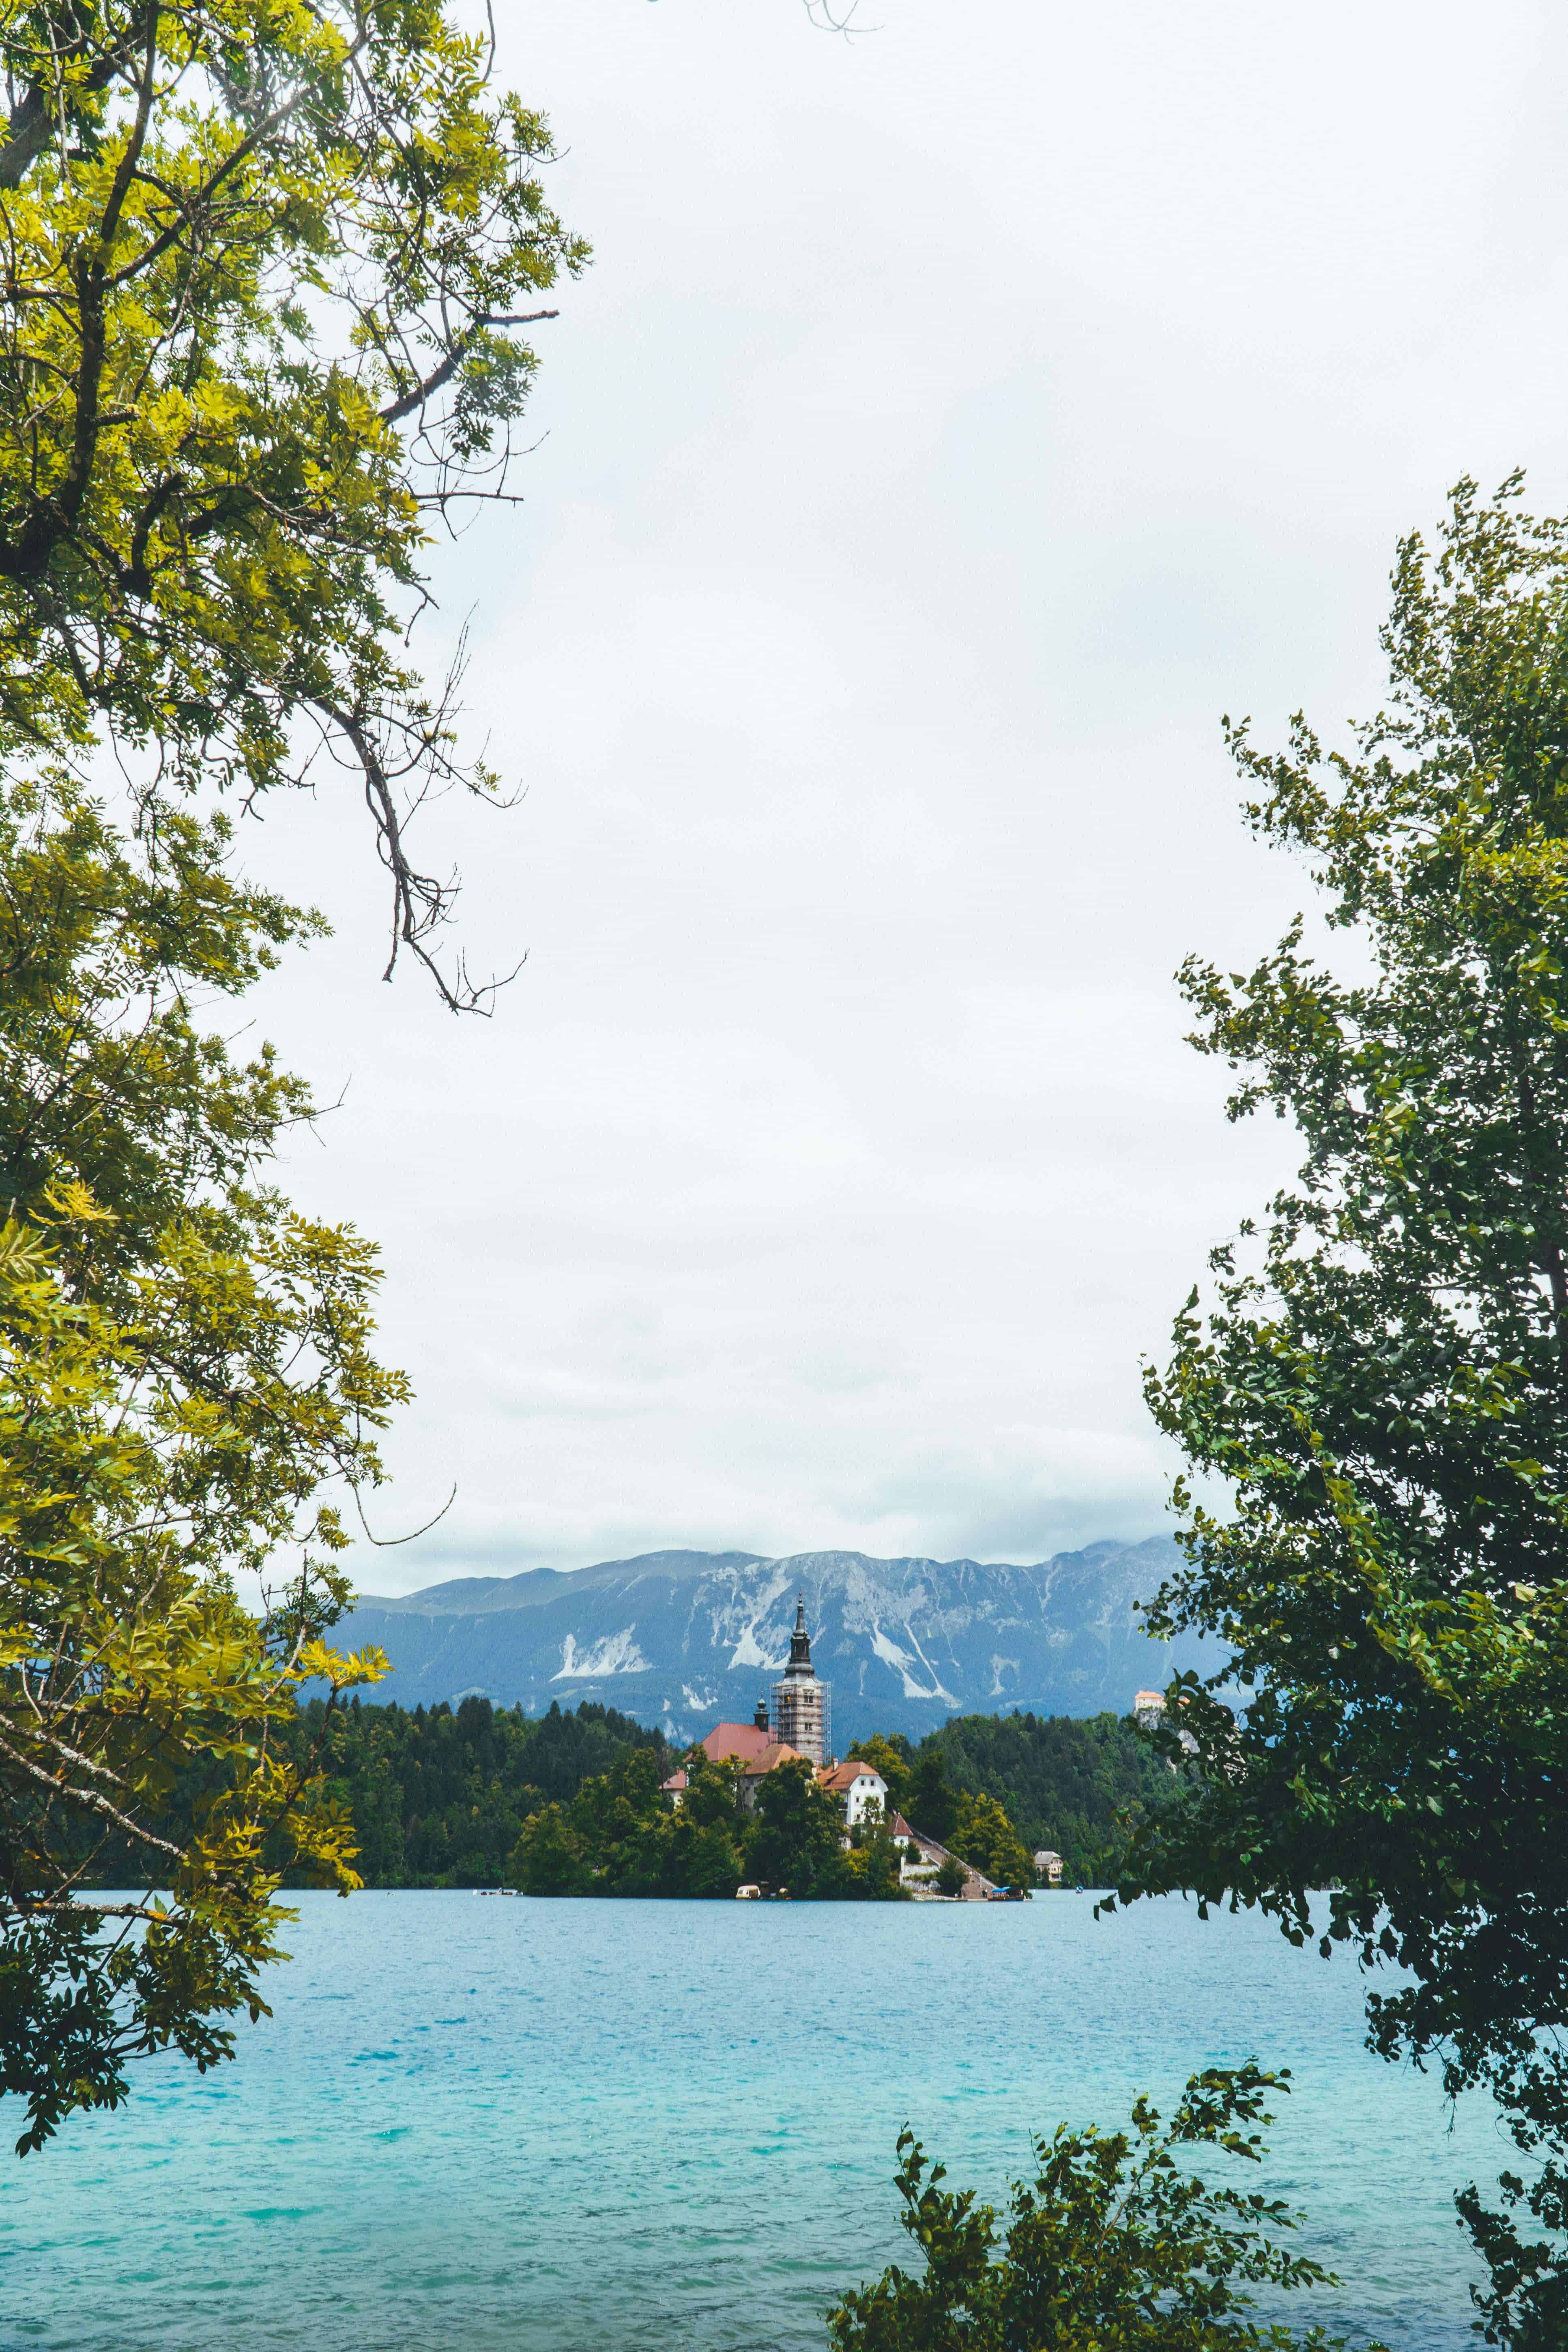 Slovenia in 20 Photos | Lake Bled | The Republic of Rose | #Slovenia #LakeBohinj #Bohinj #LakeBled #Bled #Europe #Ljublana #Travel